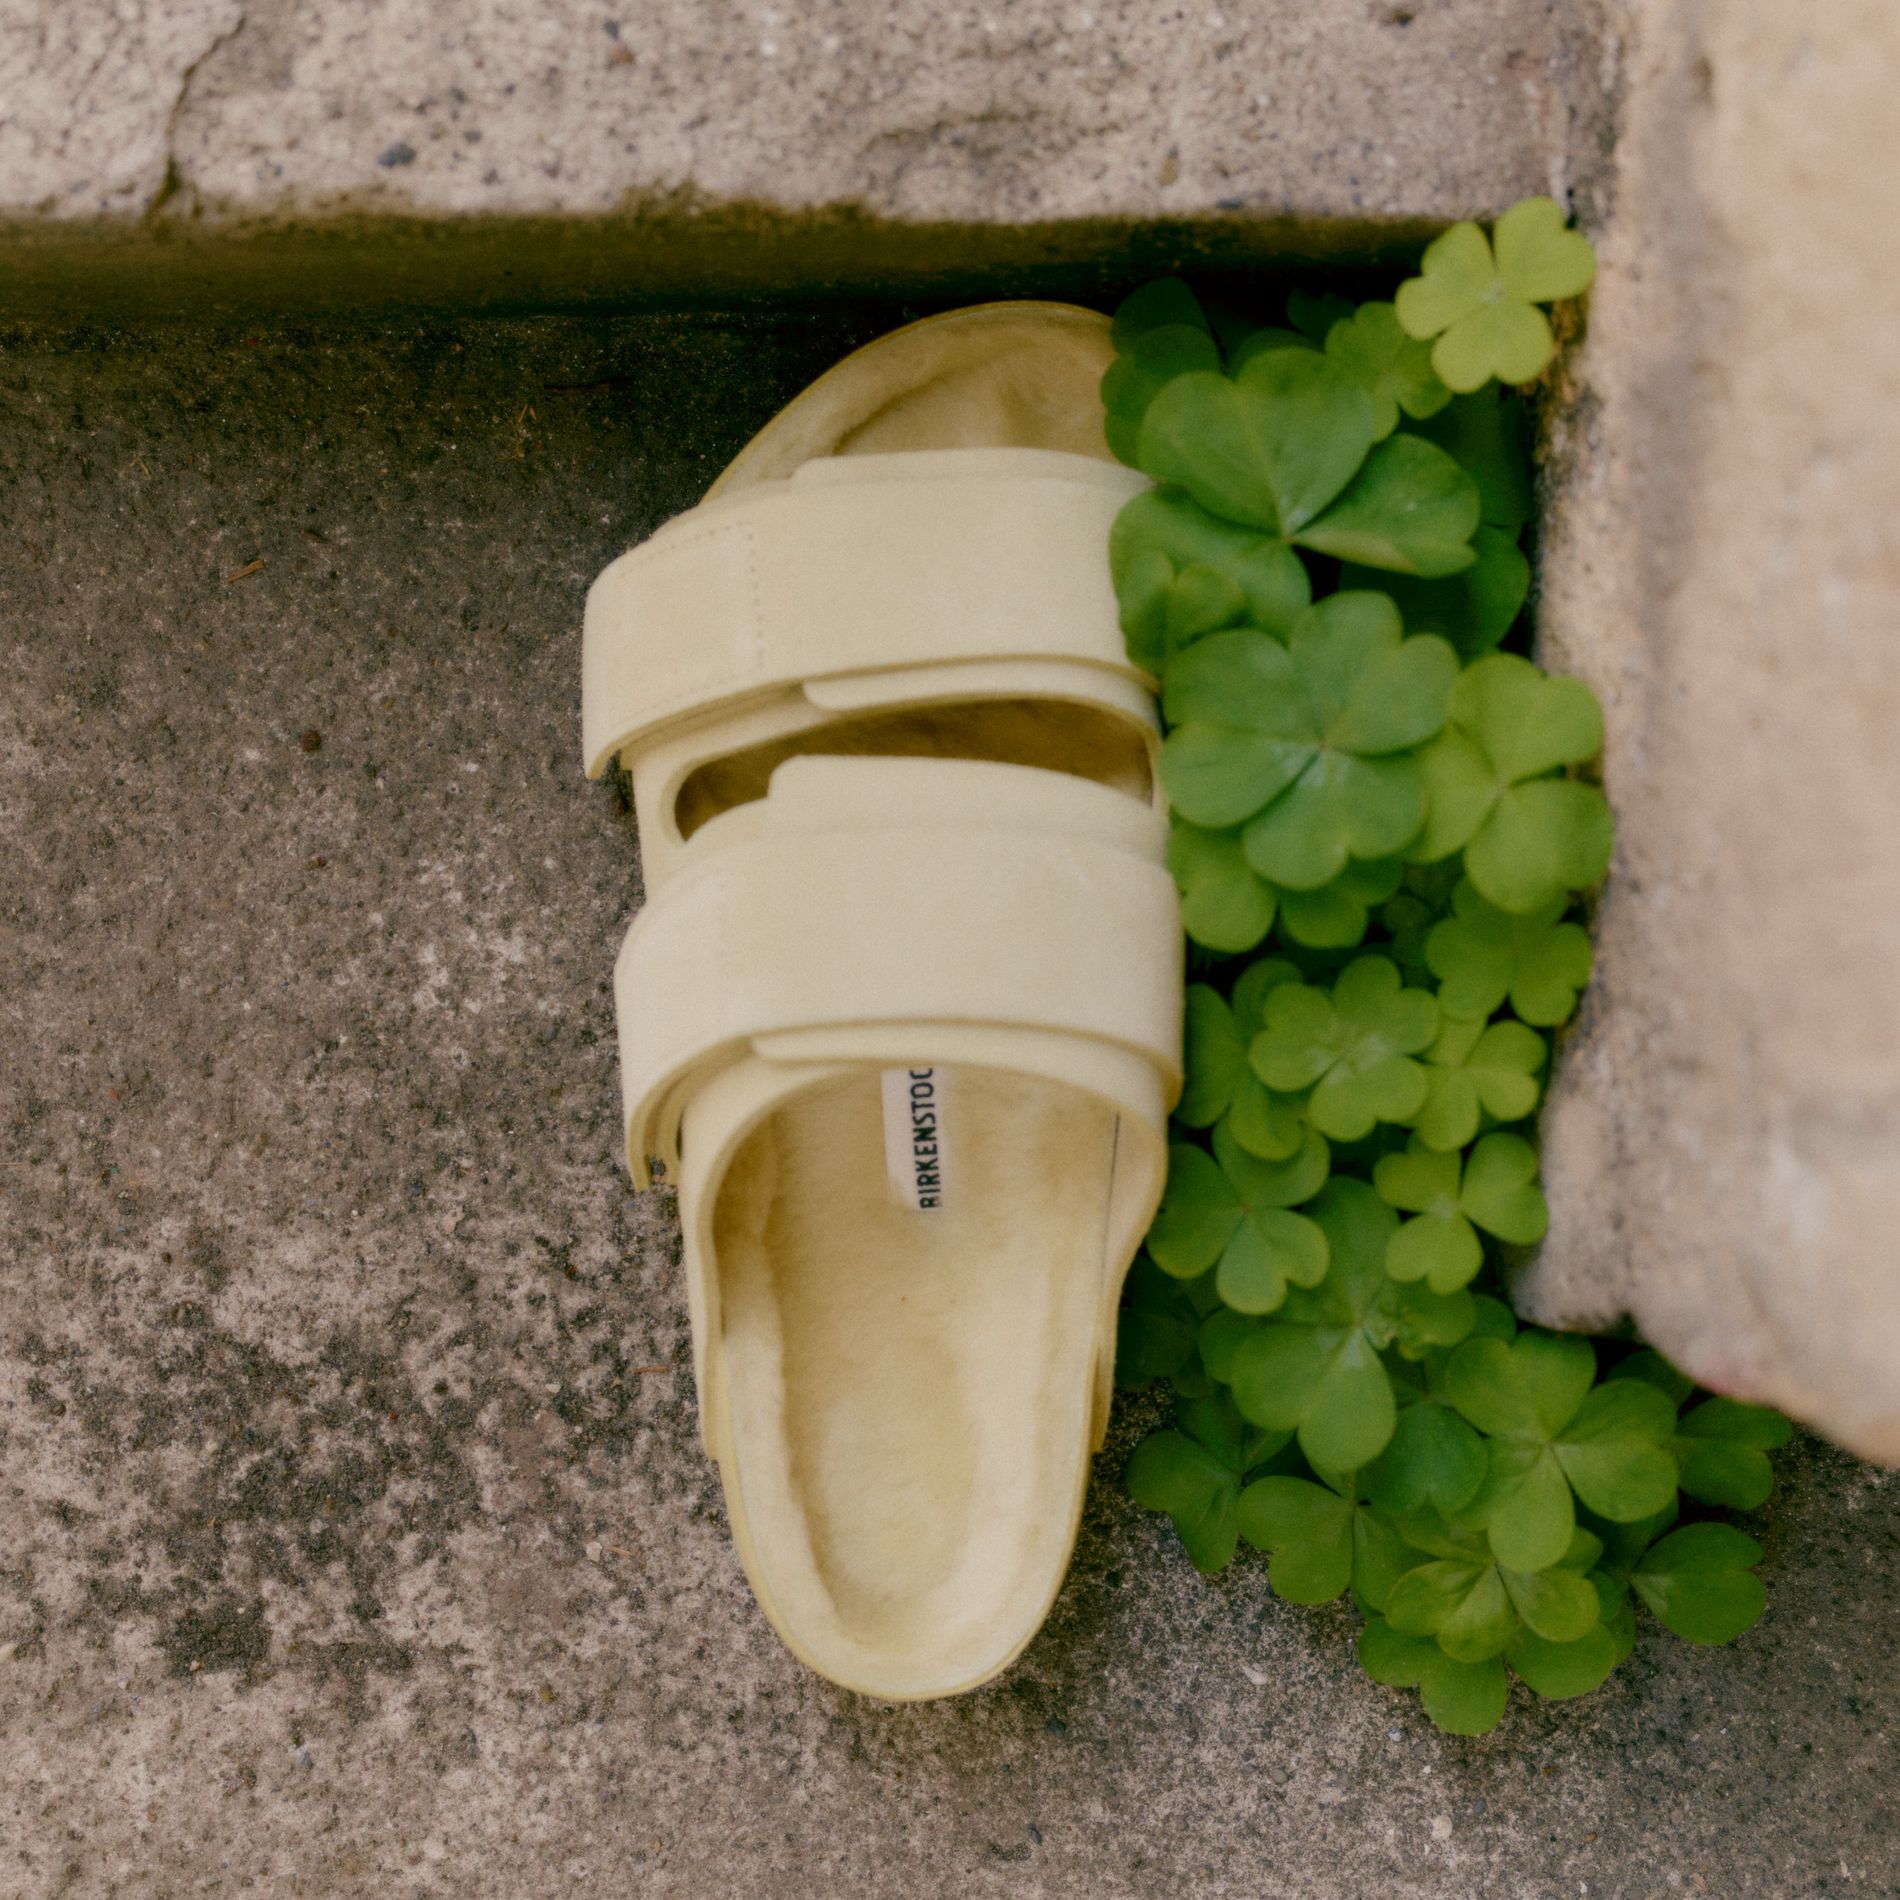 Birkenstock takes a bigger step into Scandinavia with its first